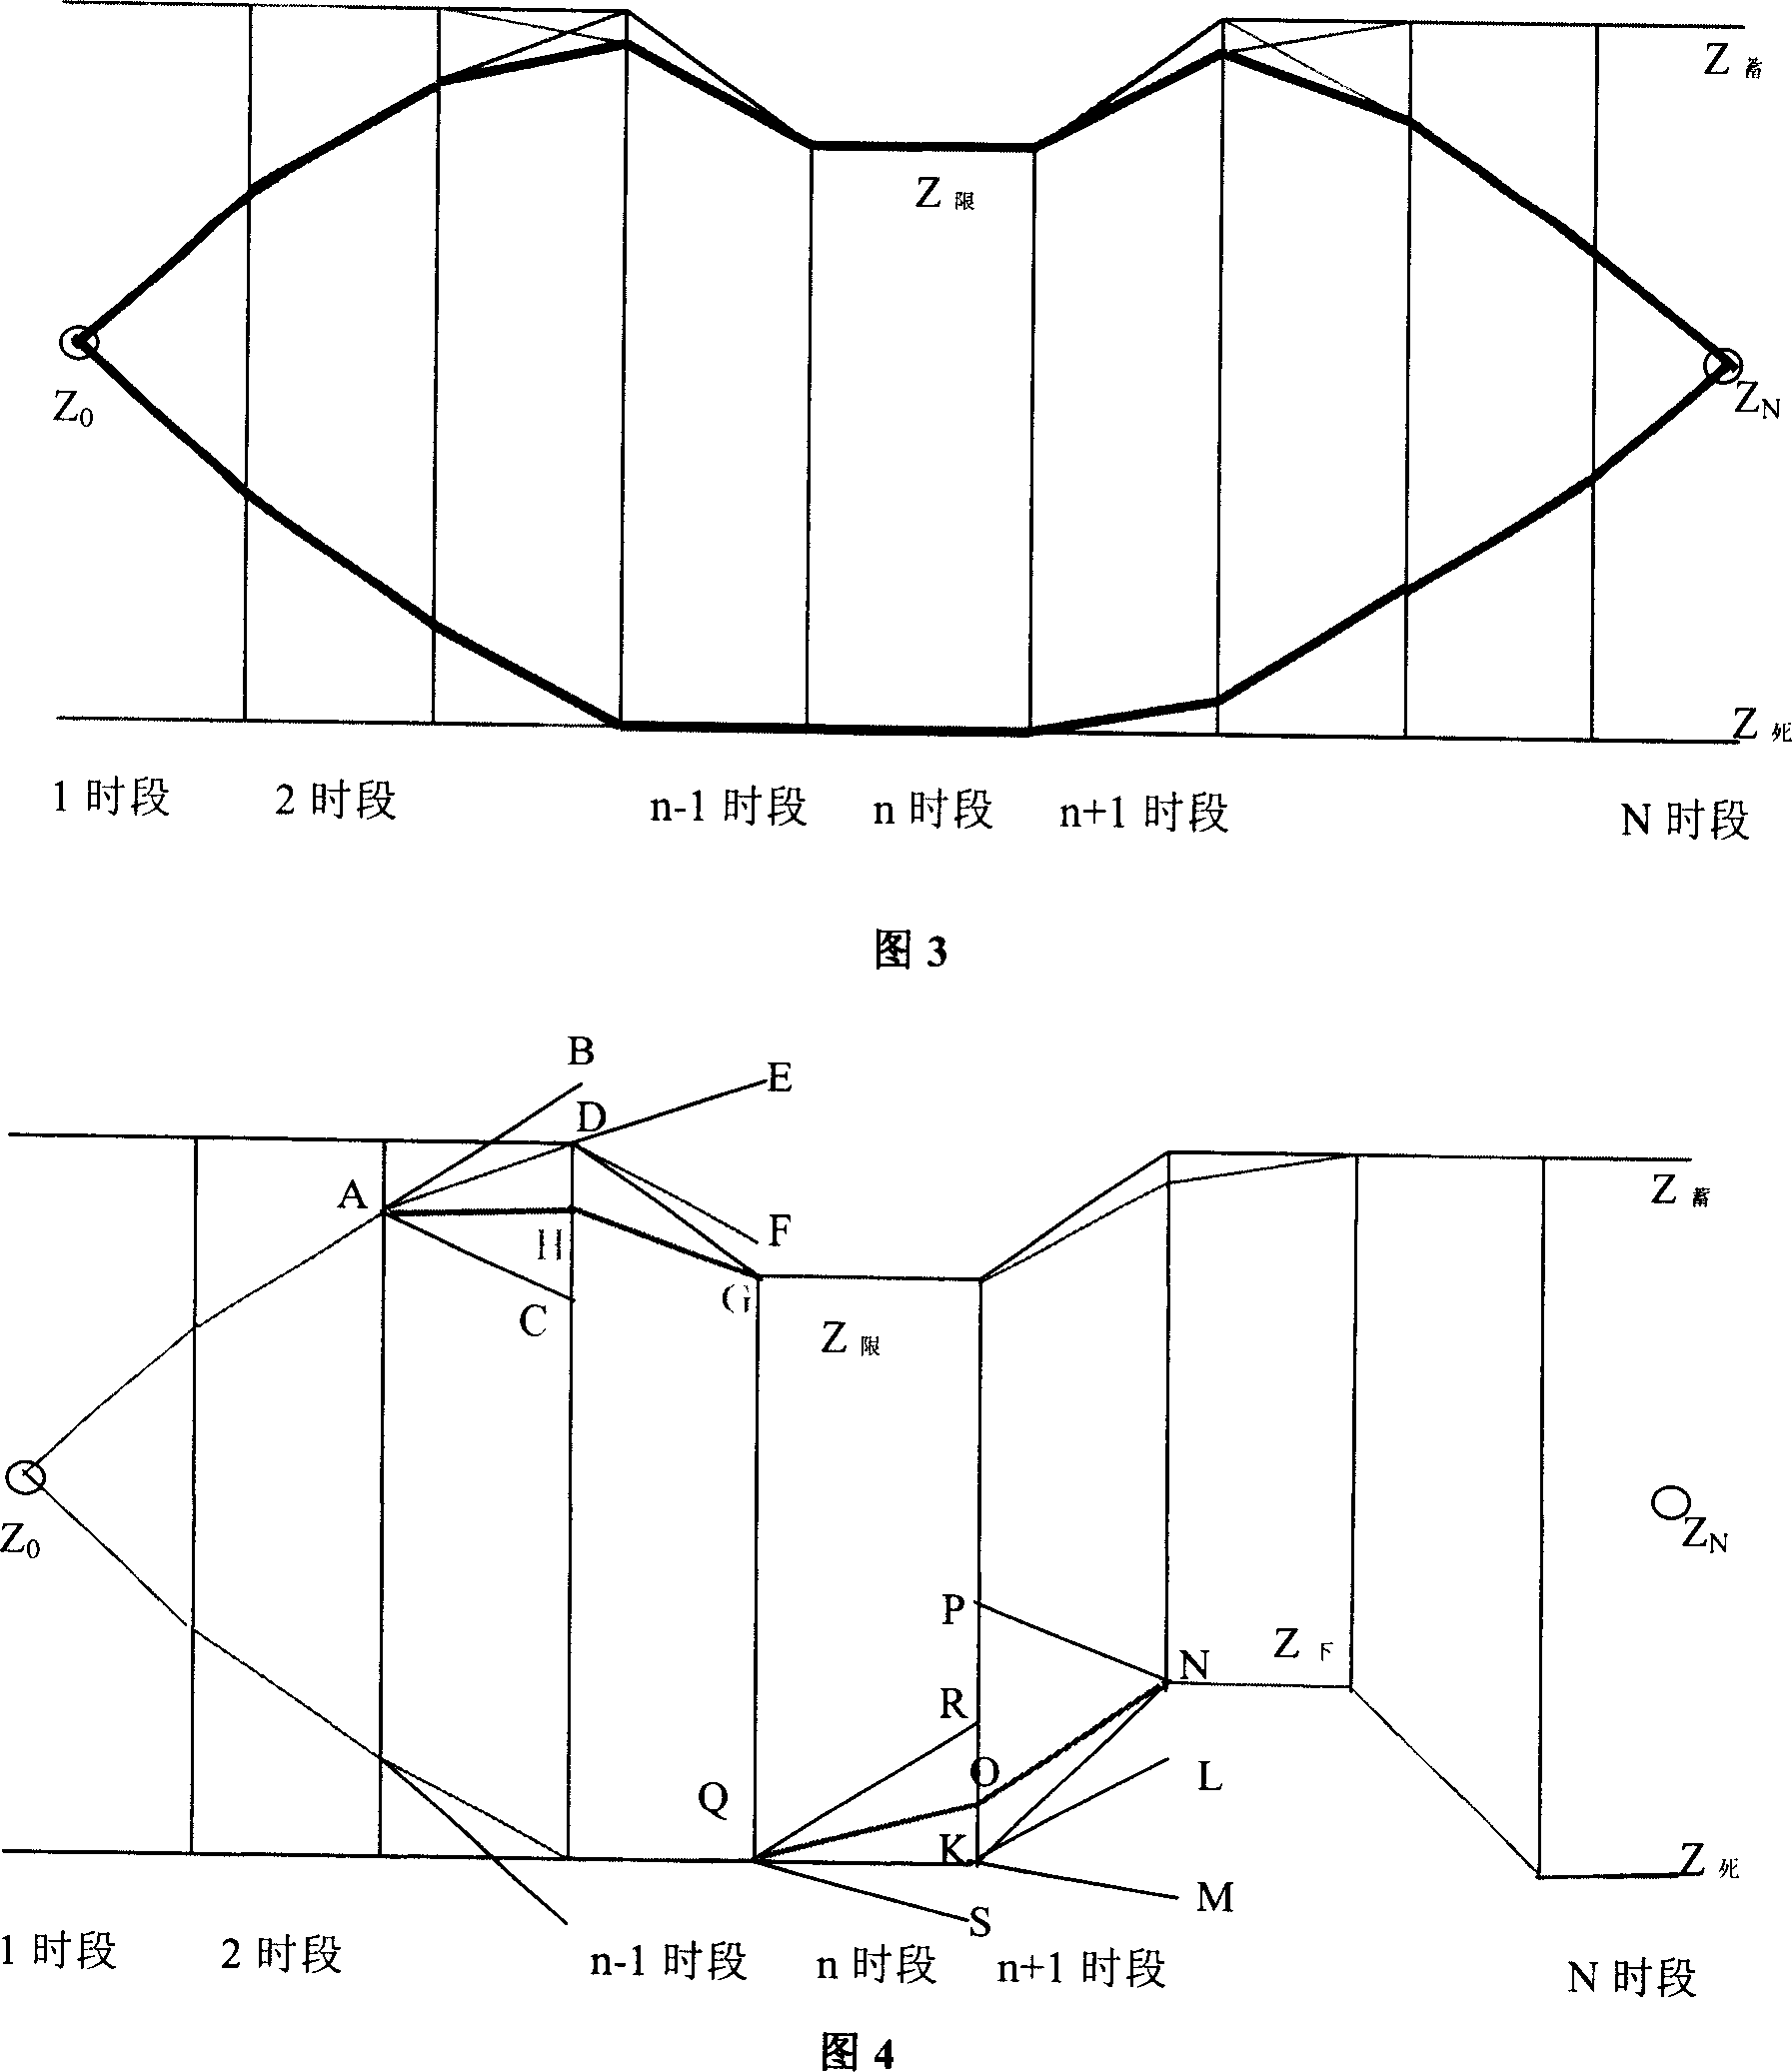 Feasible searching method of optimizing scheduling of reservoir